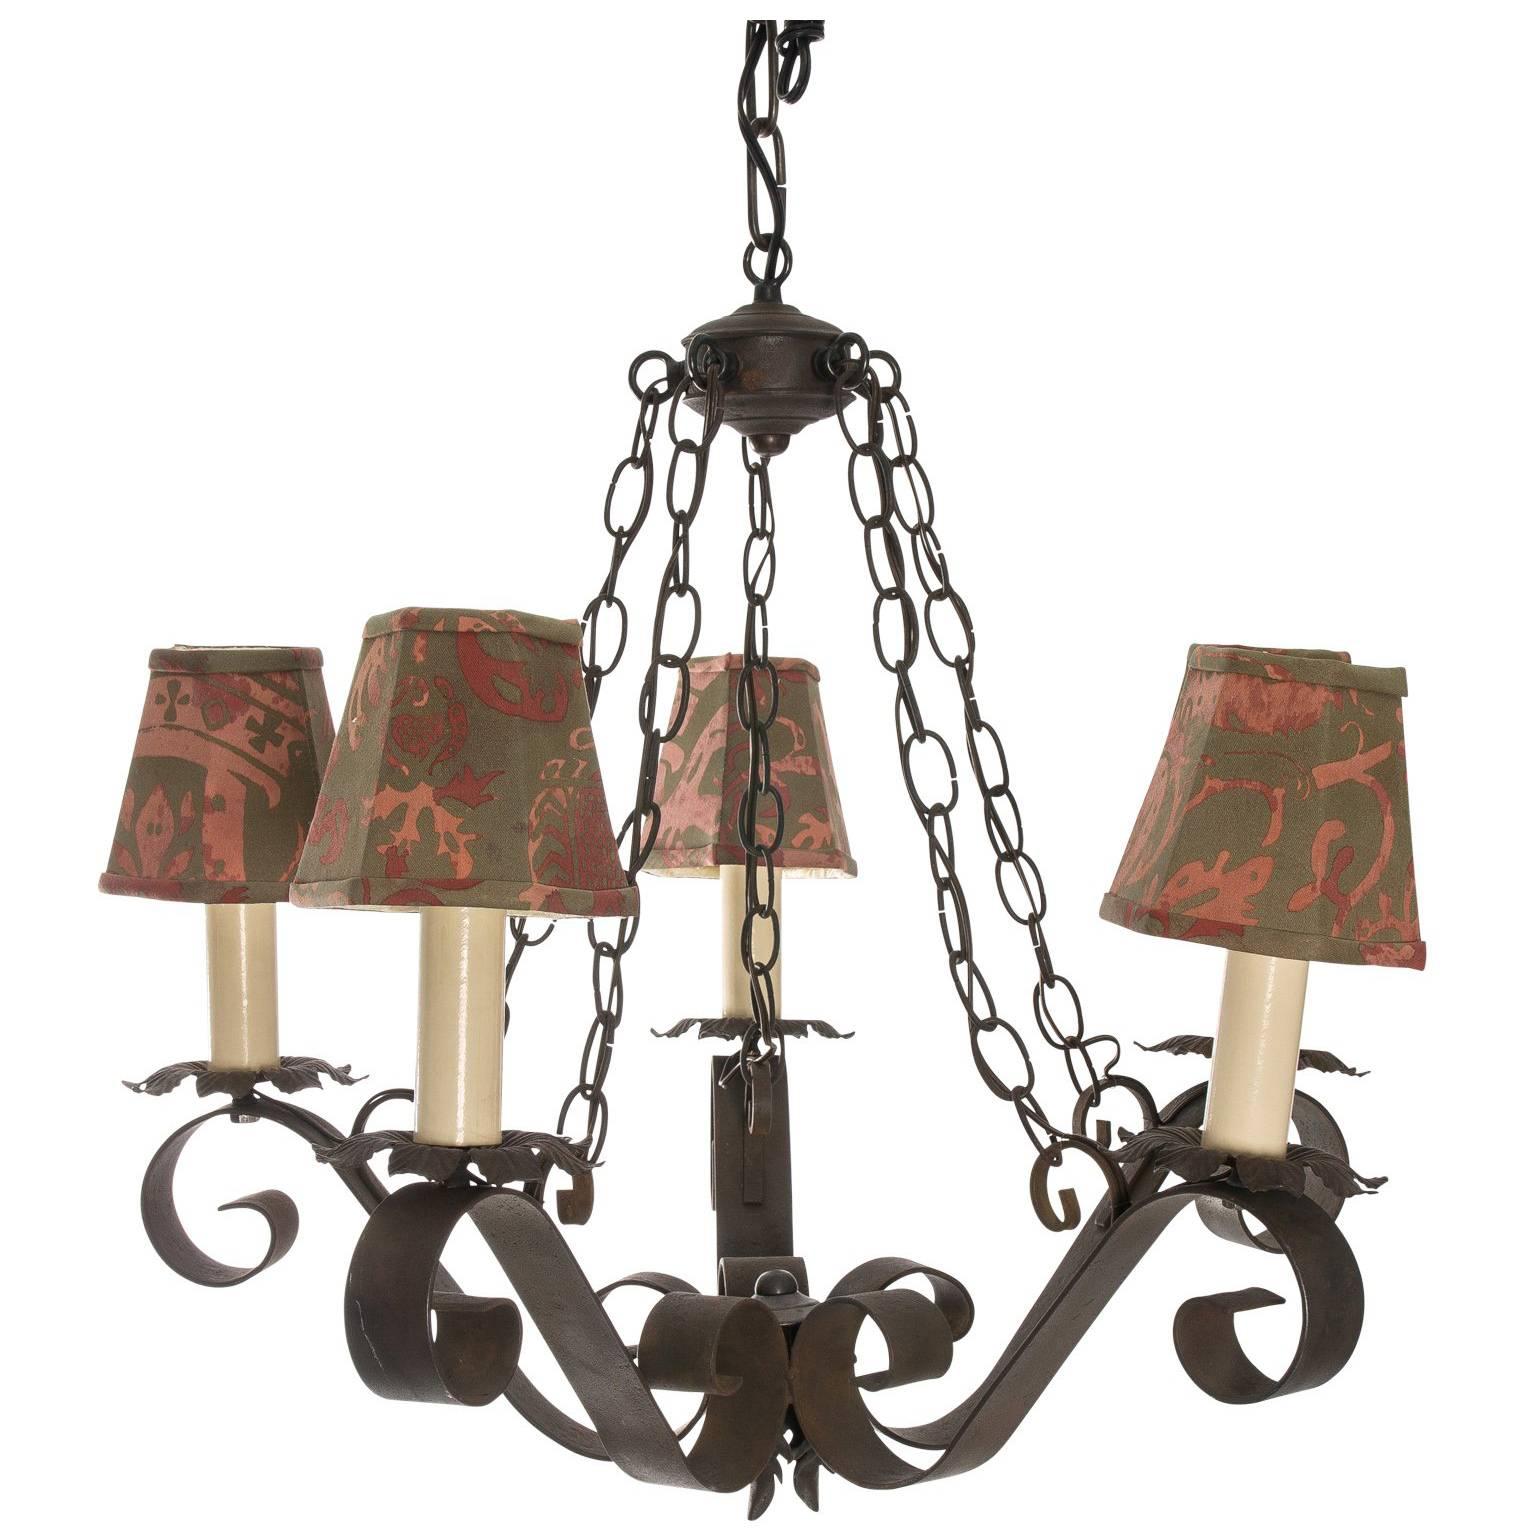 Gothic Wrought Iron Chandelier For Sale